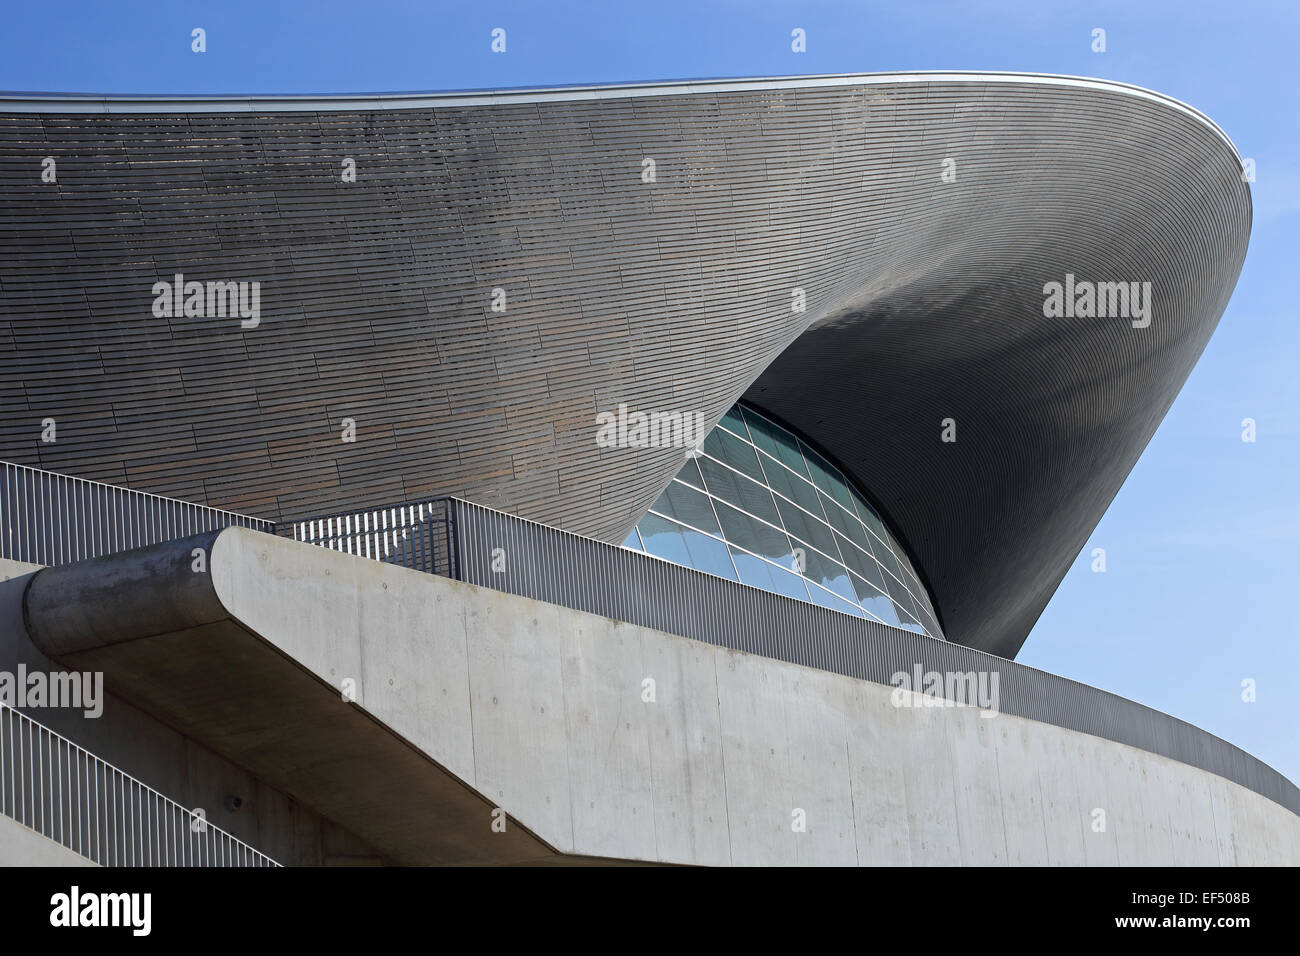 London Olympic Aquatic centre designed by Zaha Hadid showing roof structure and glazing. Temporary seating wings removed. Stock Photo